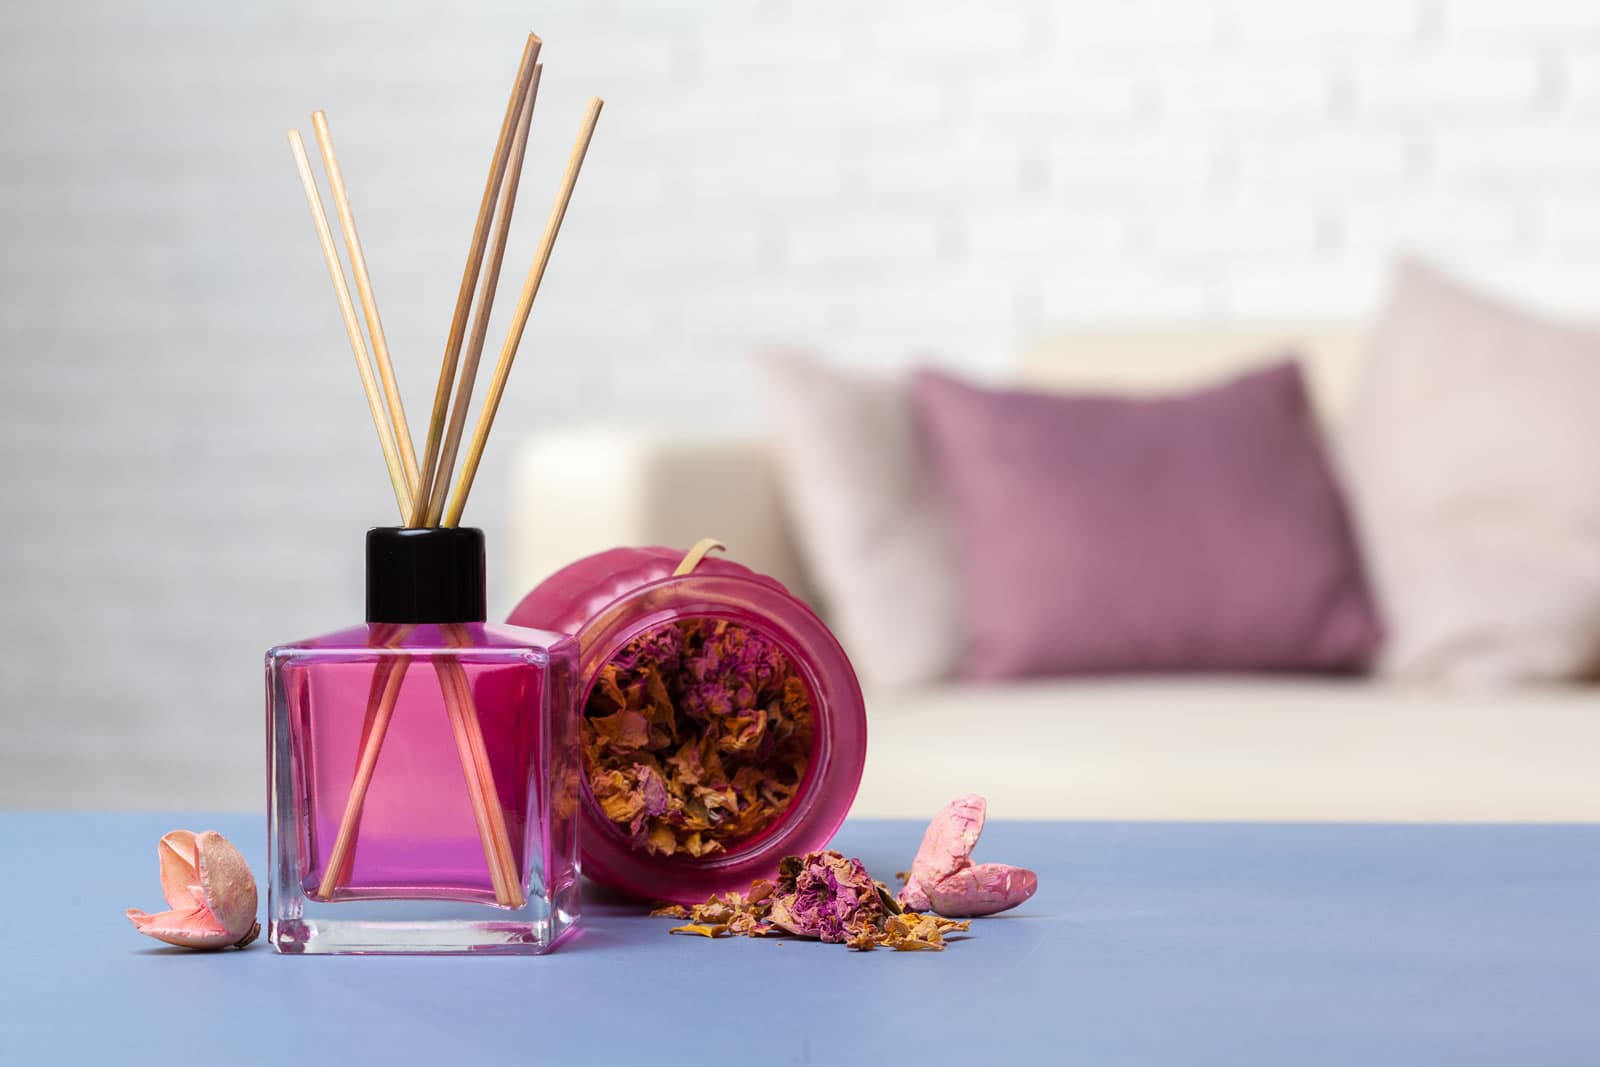 Close up of room scent sticks in a pink glass bottle domestic setting